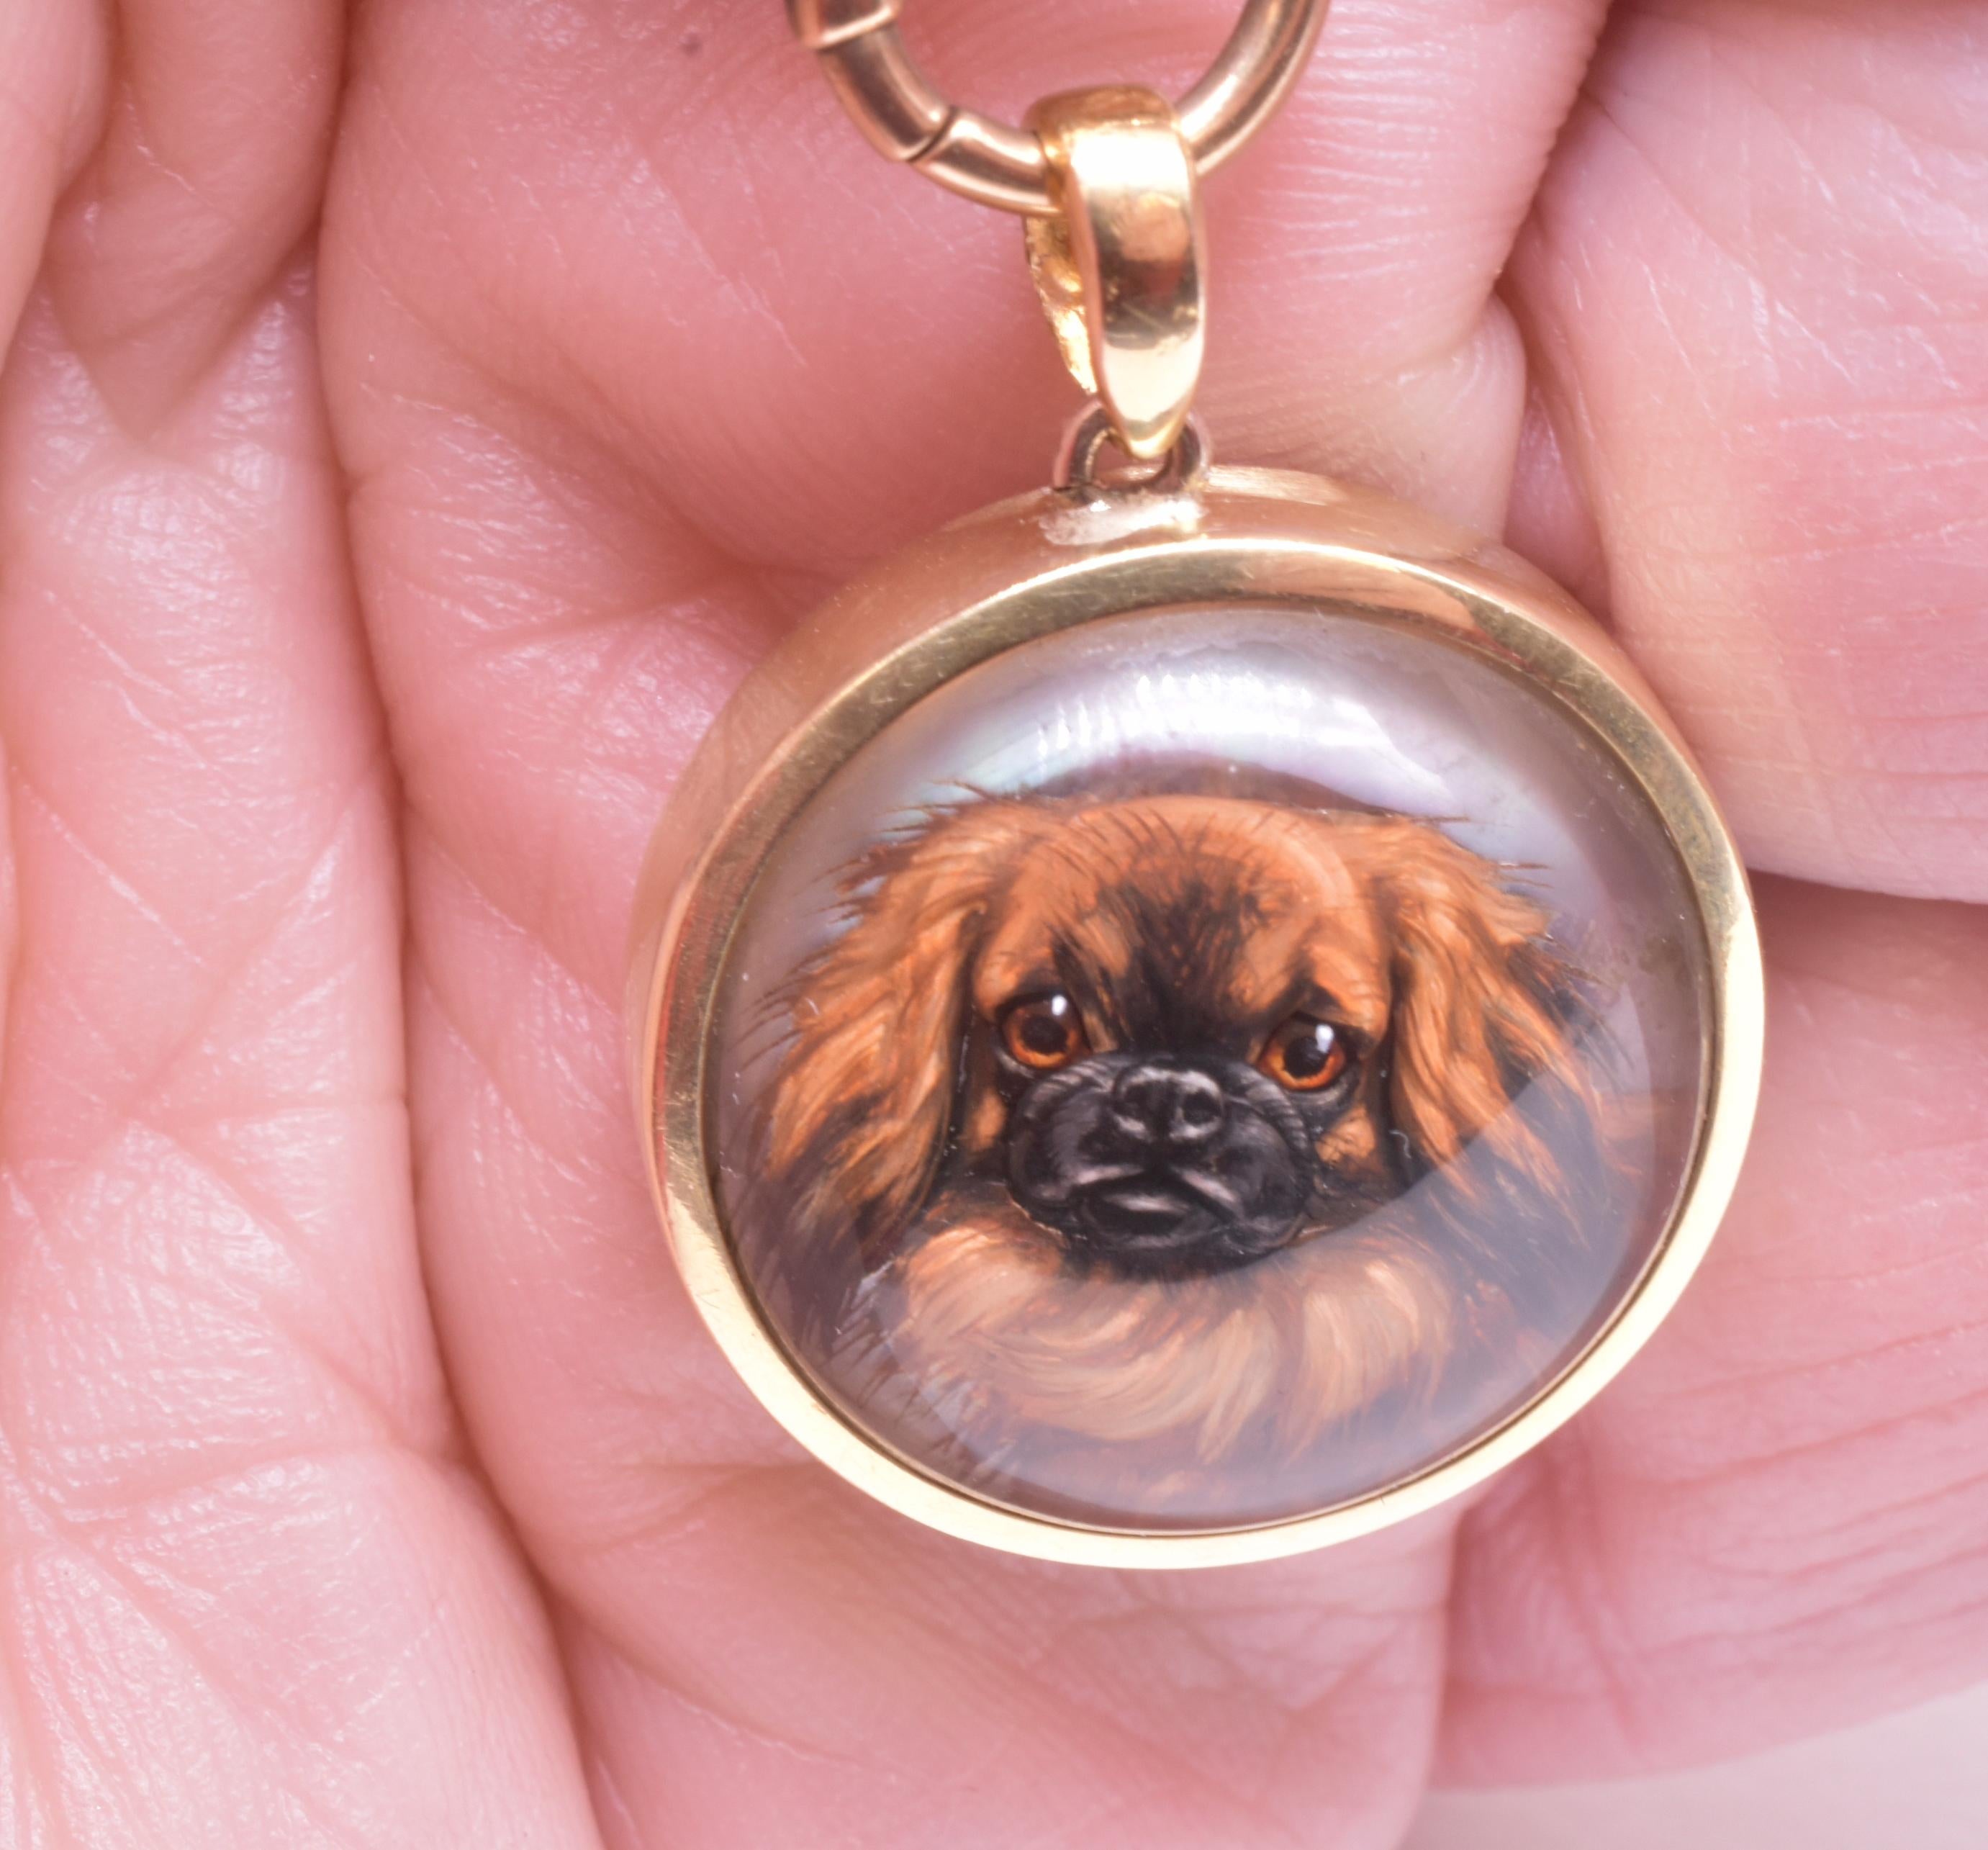 18K pendant of rock crystal with a reverse intaglio of a realistically and beautifully rendered adorable Pekingese. The pendant has an integral matching bale. The reverse side has an inscription which reads: Ed. Van den Hove & Fils, Bruxelles, C.